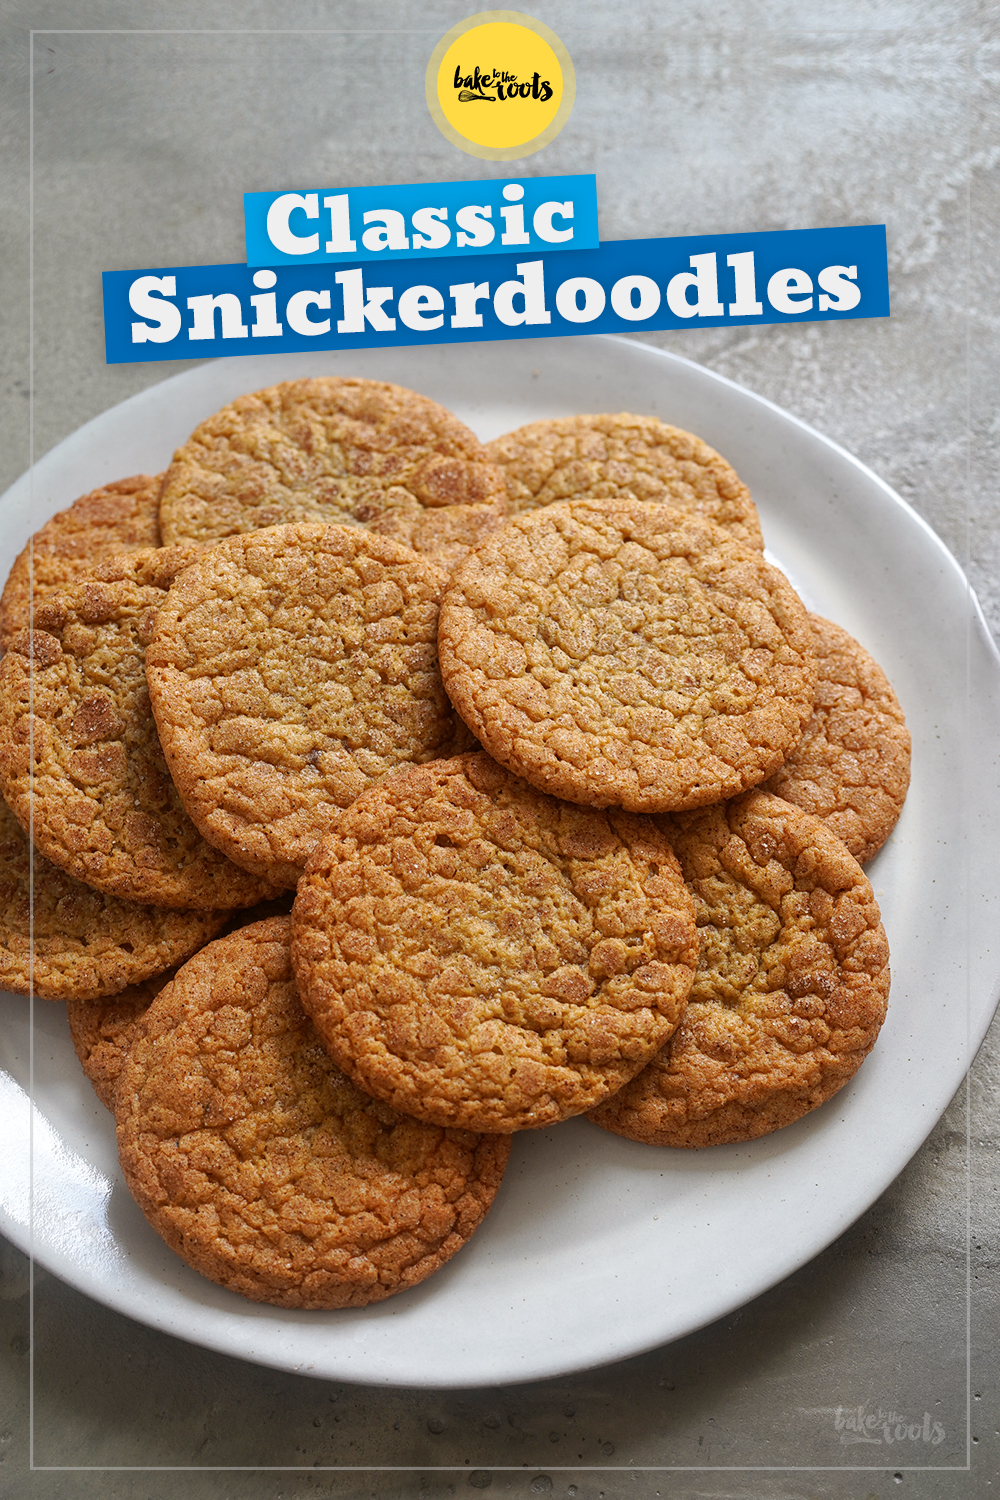 (The Best) Classic Snickerdoodles | Bake to the roots